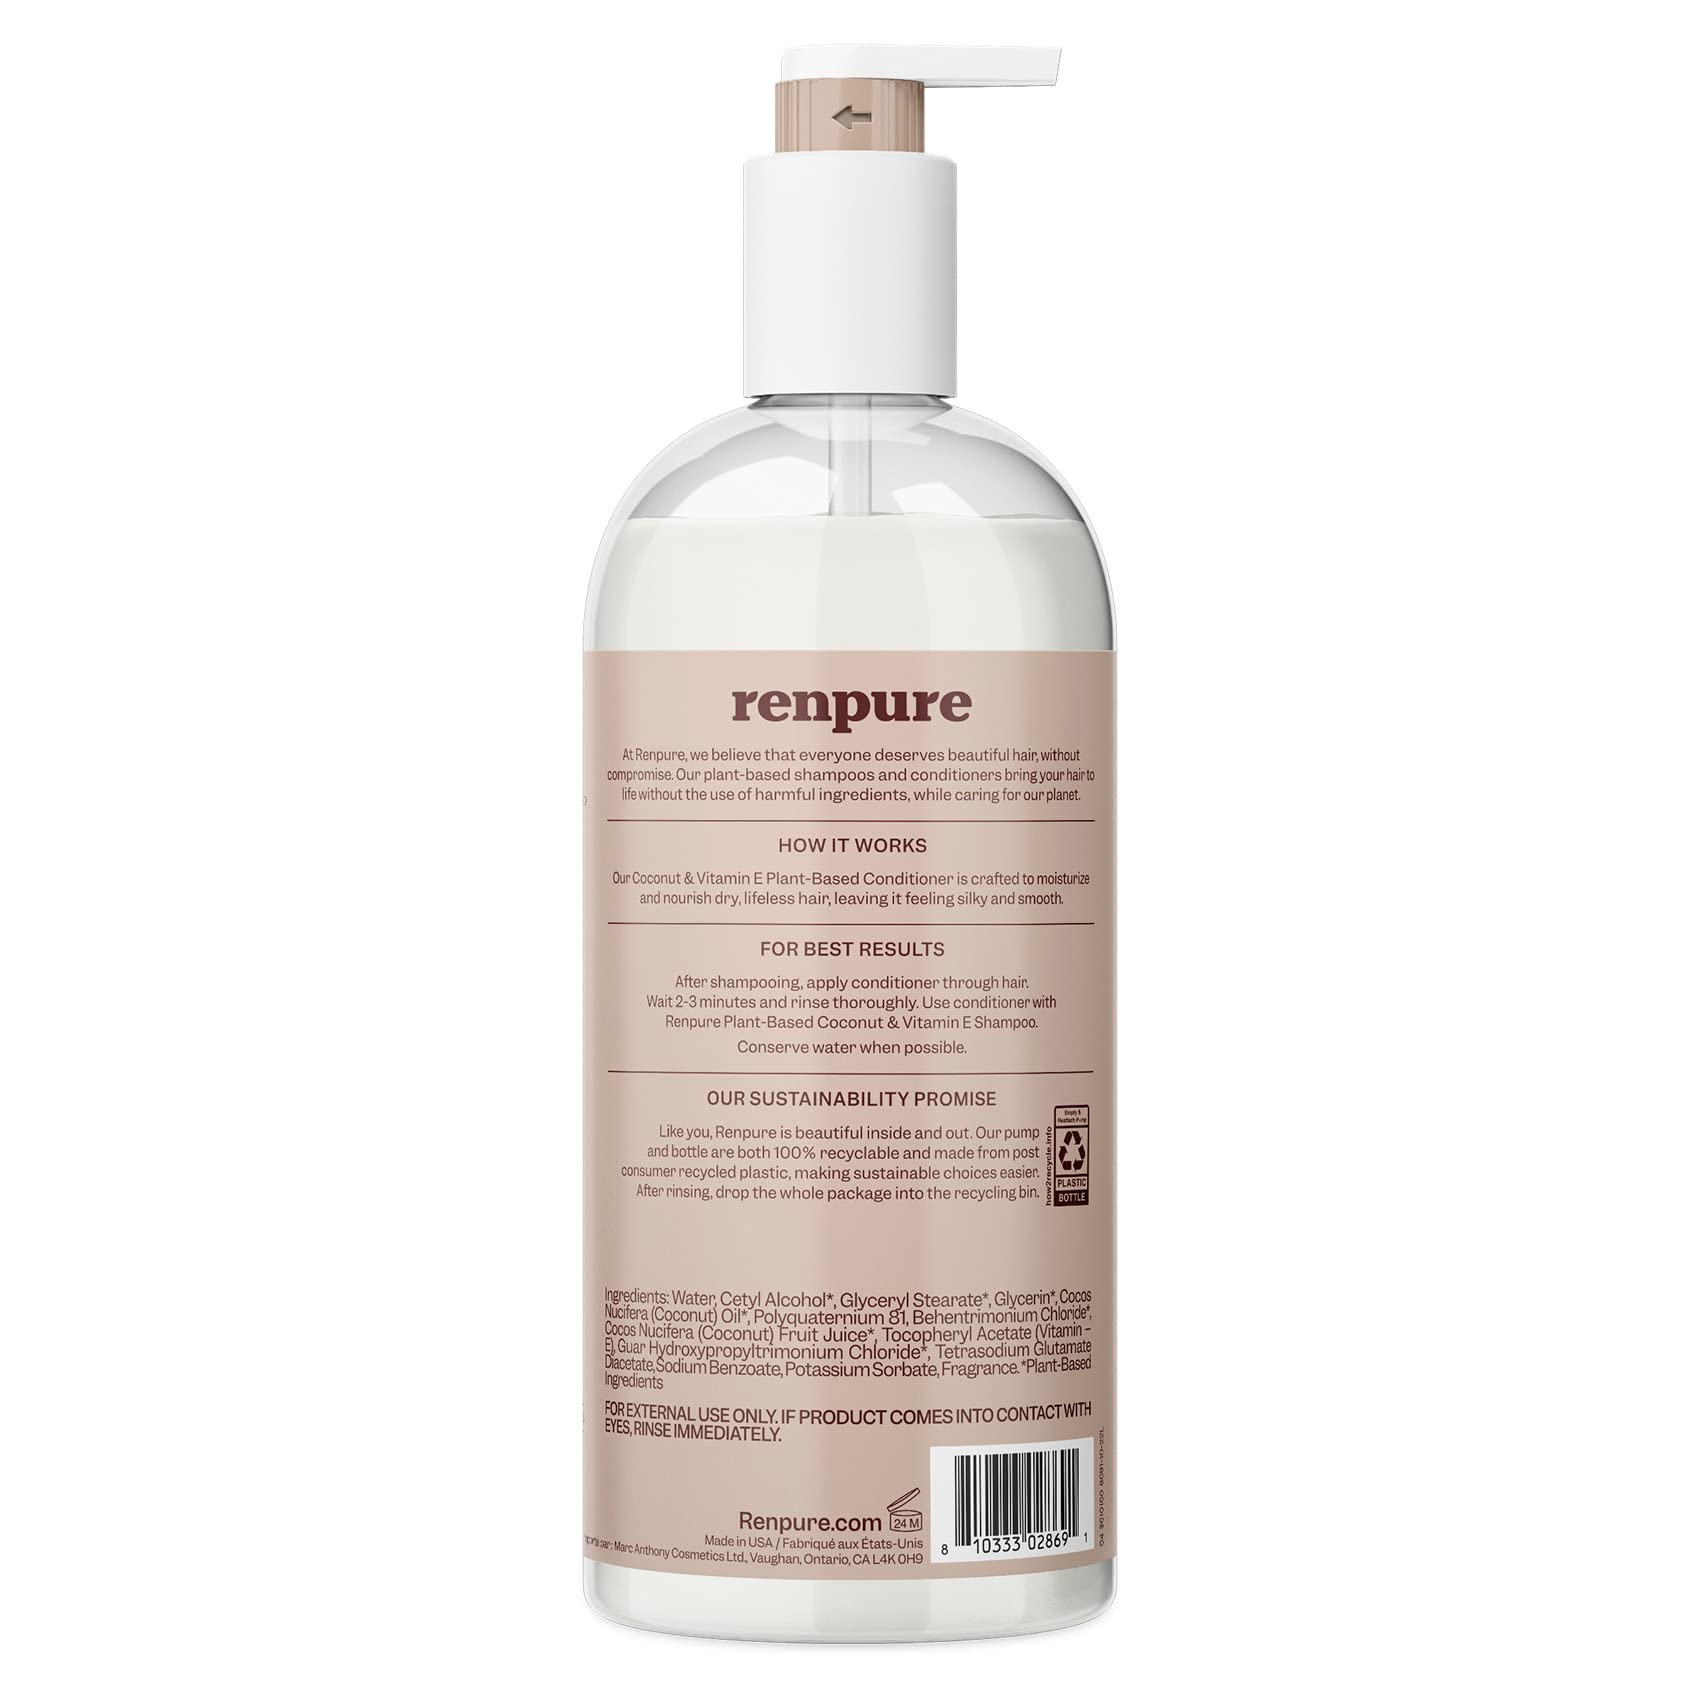 Renpure Plant Based Coconut and Vitamin E Moisturize and Replenish Conditioner - Ideal for Dry, Lifeless Hair - Leaves Hair Silky and Smooth - Paraben Free - Recyclable, Pump Bottle Design - 24 fl oz